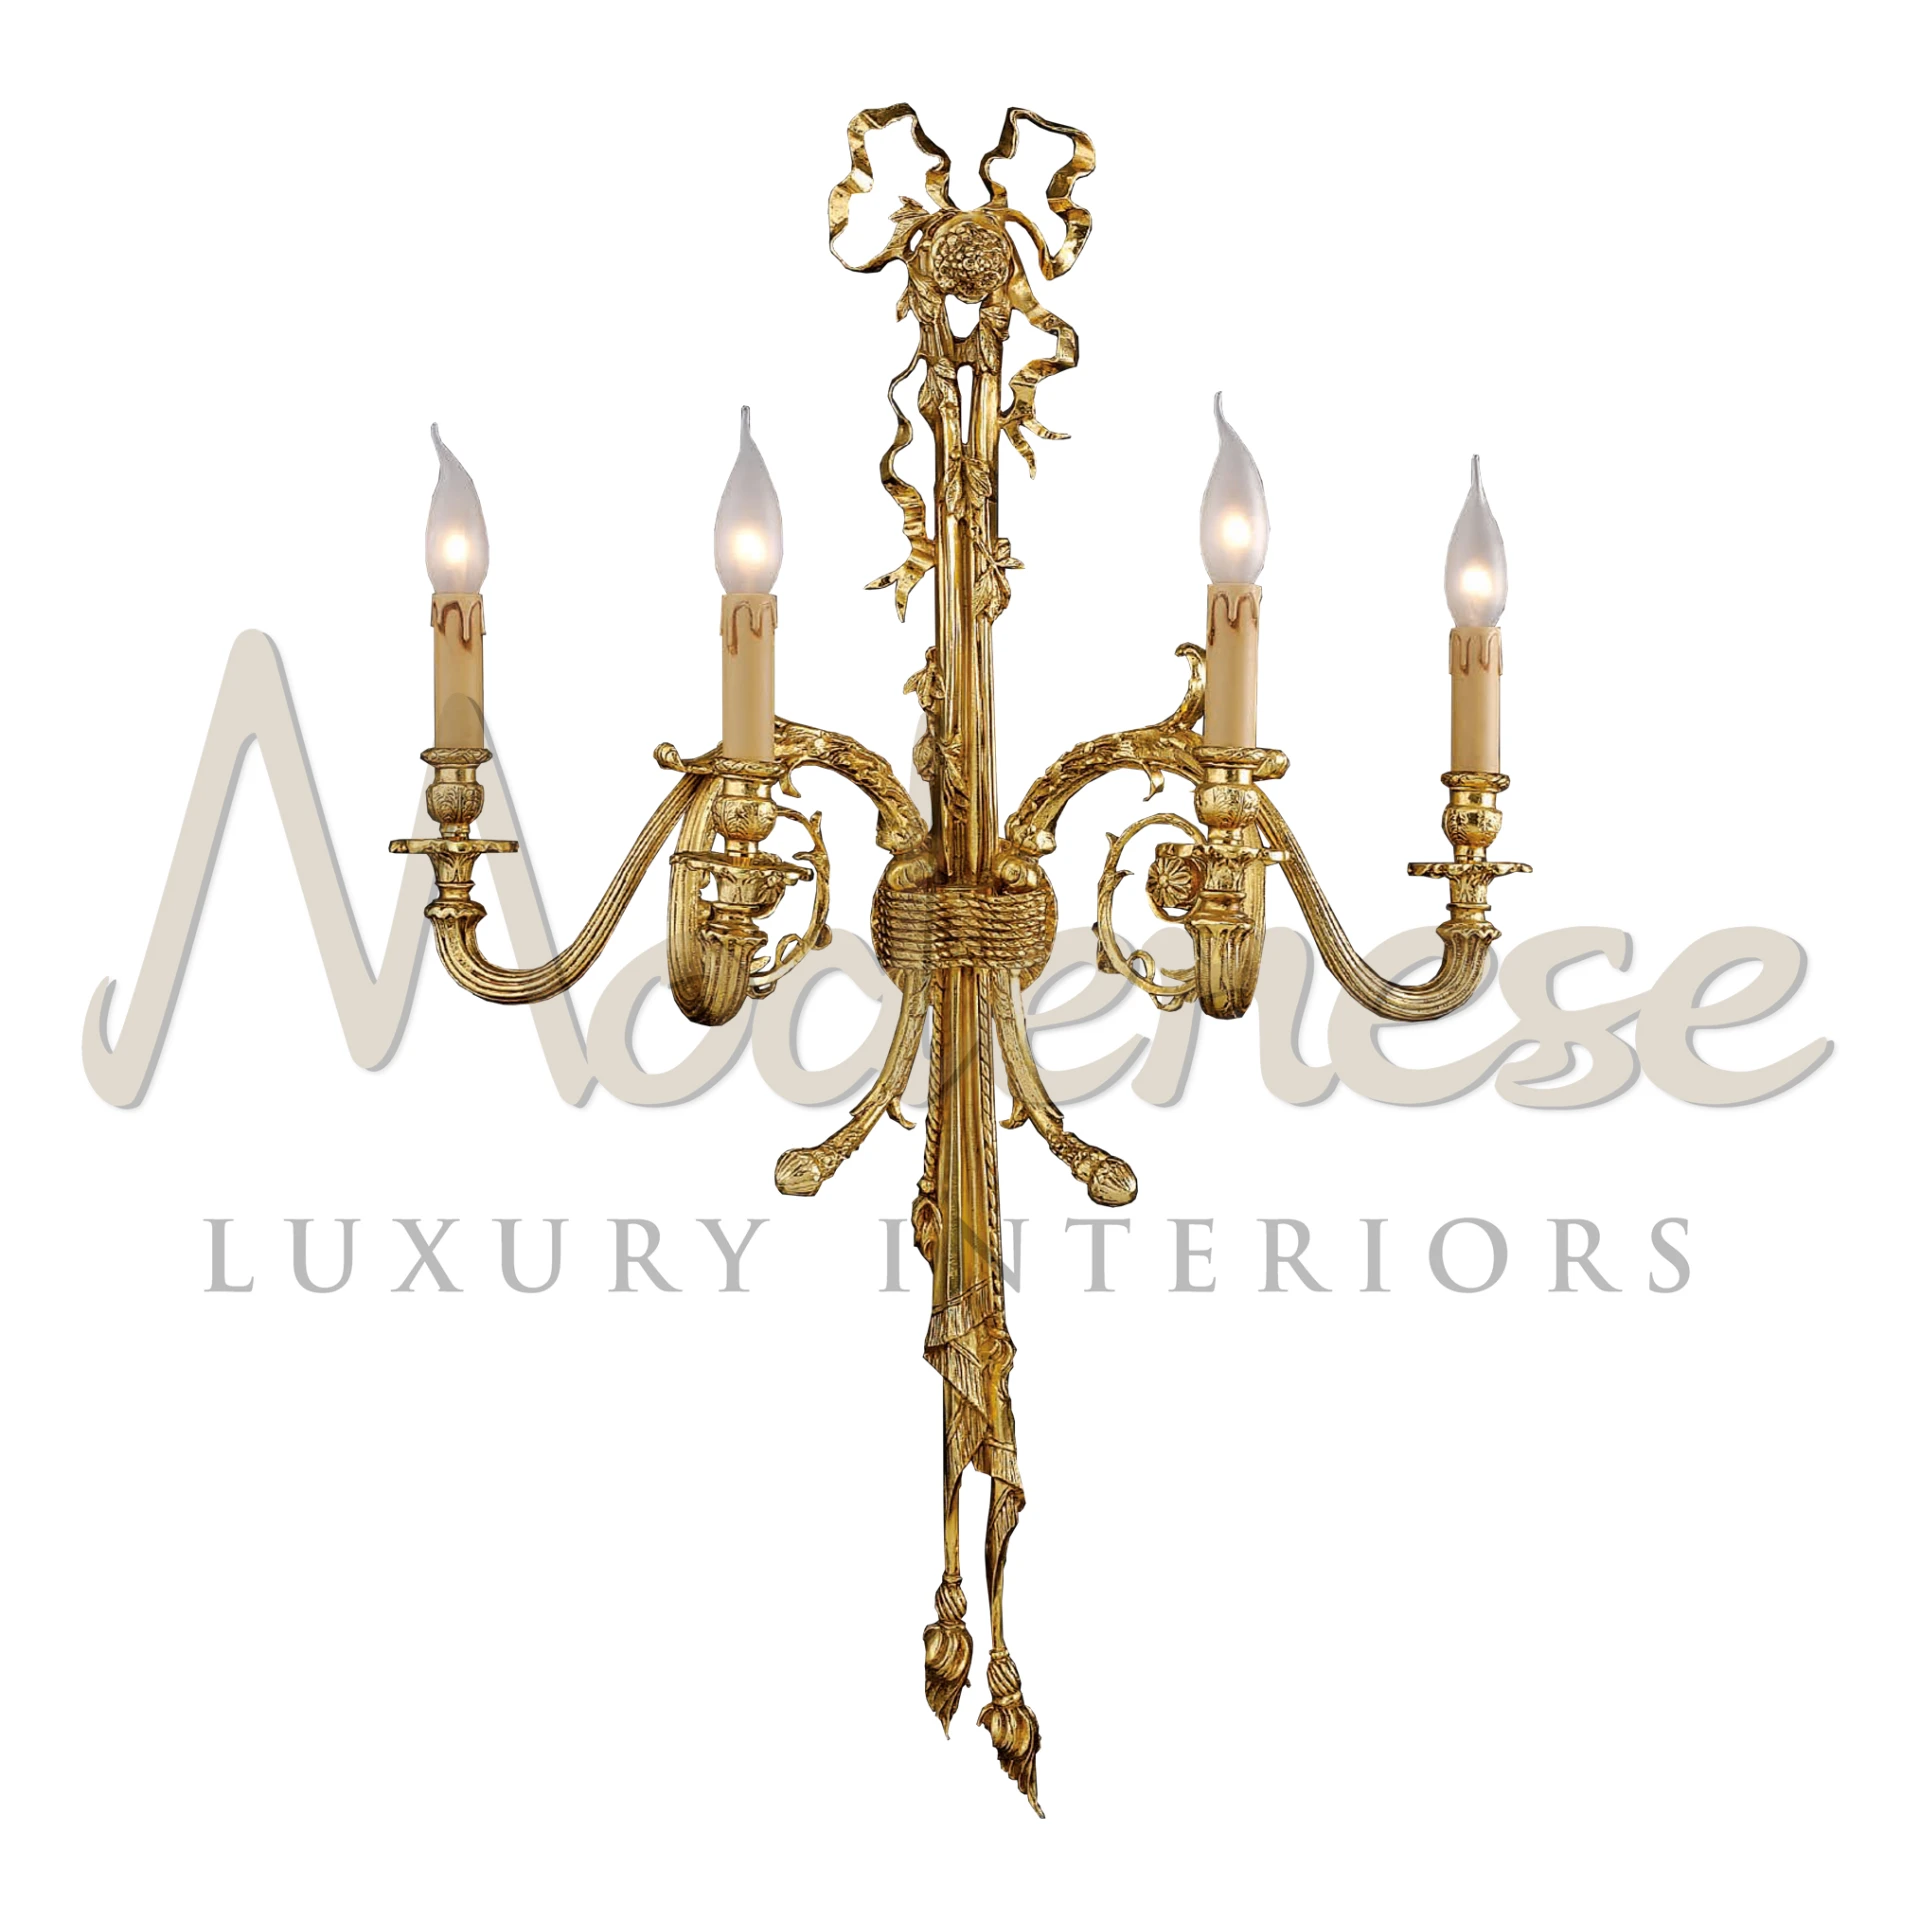 Luxurious Venetian Grace Wall Lamp with a rich gold glaze and flame-like light fittings